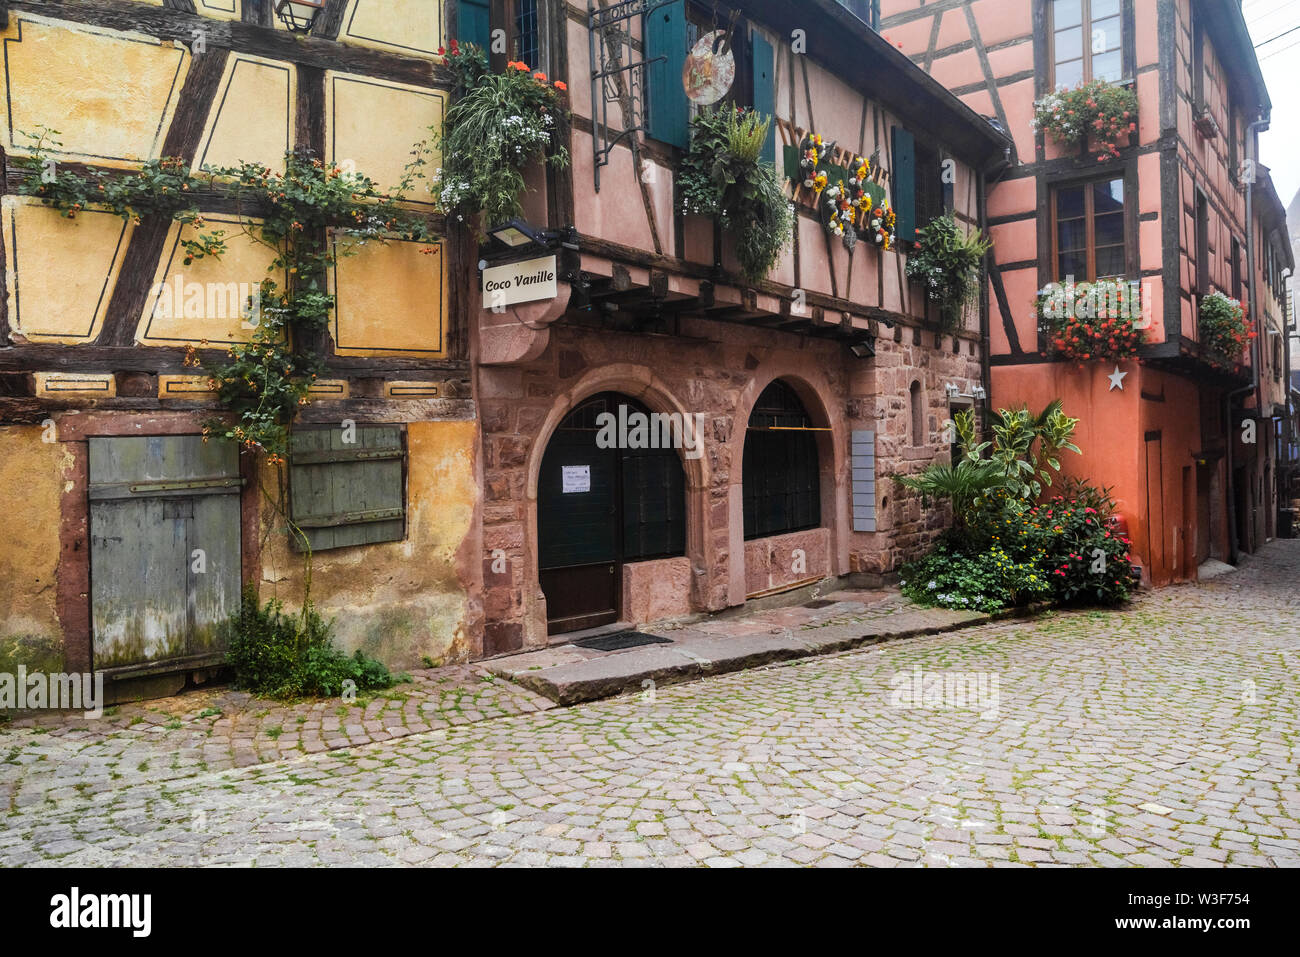 ensemble with half-timbered houses in Riquewihr, Alsace Wine Route, France, touristy medieval site Stock Photo